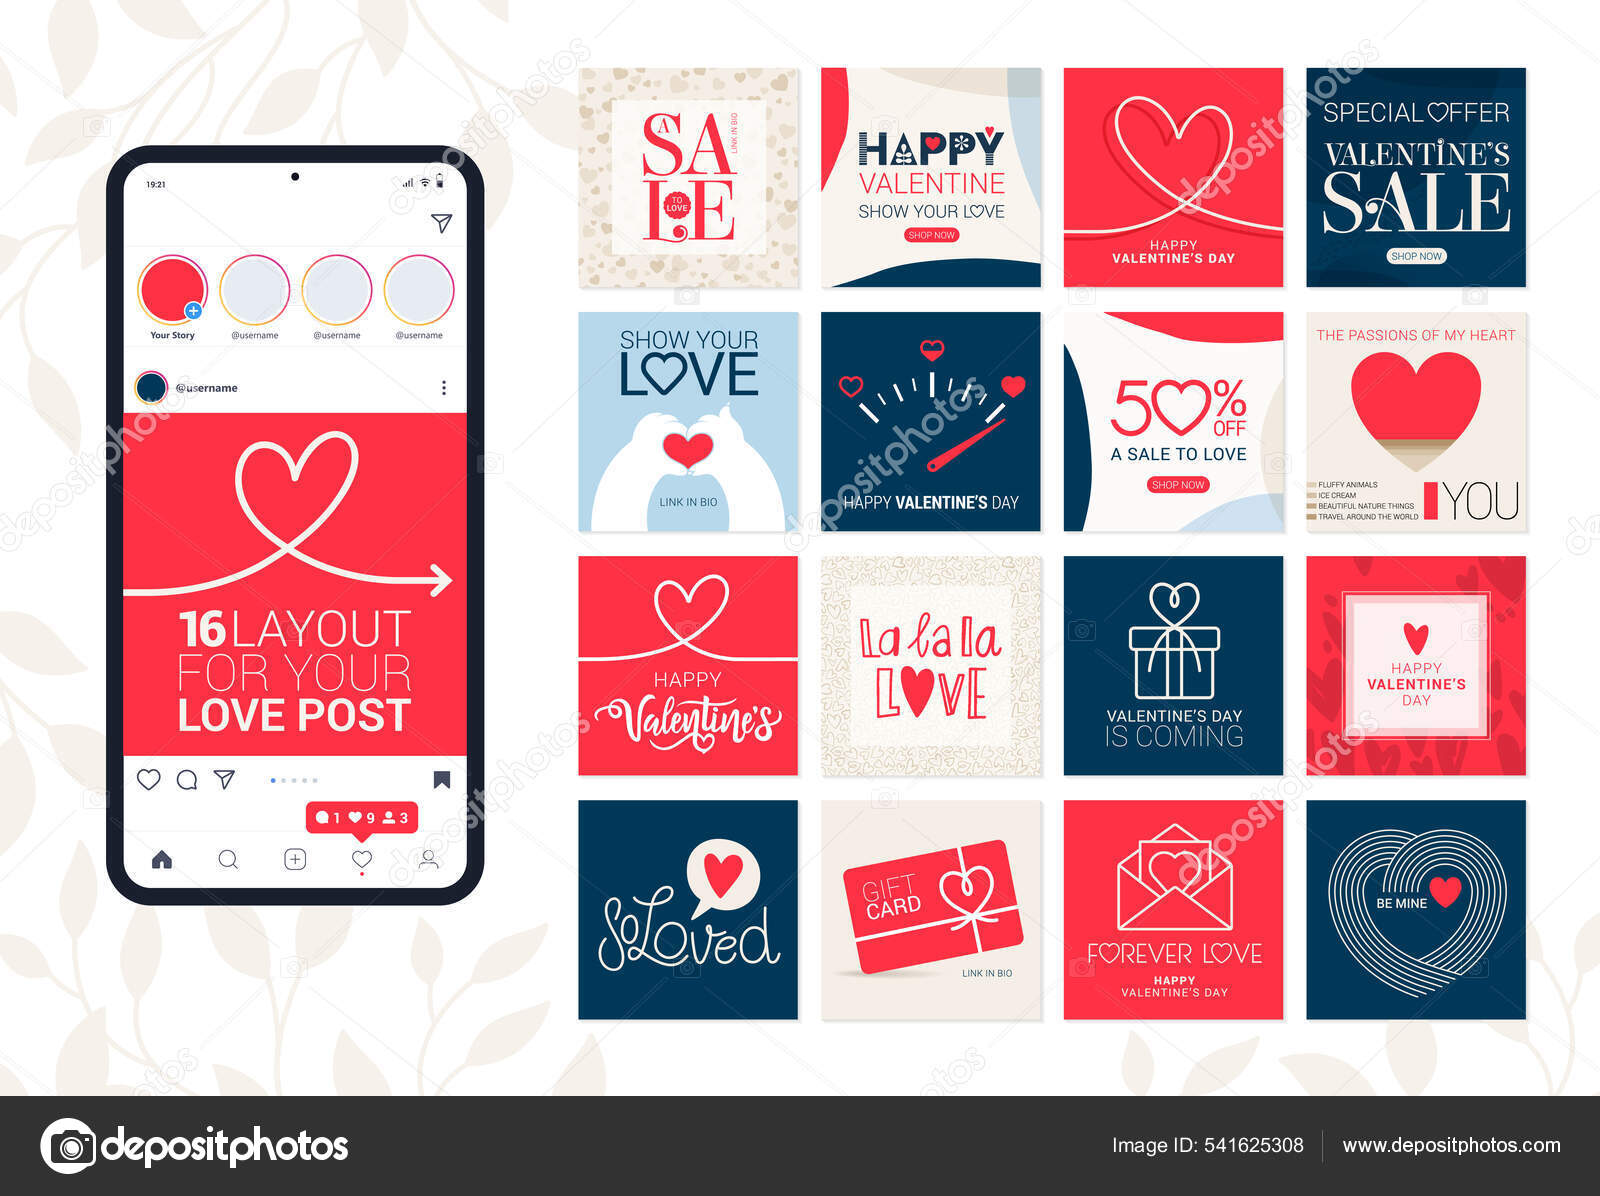 Trendy Valentine's Day Posts Stories Template Instagram Blog Sales Web  Stock Vector by ©Fourleaflovers 541625308